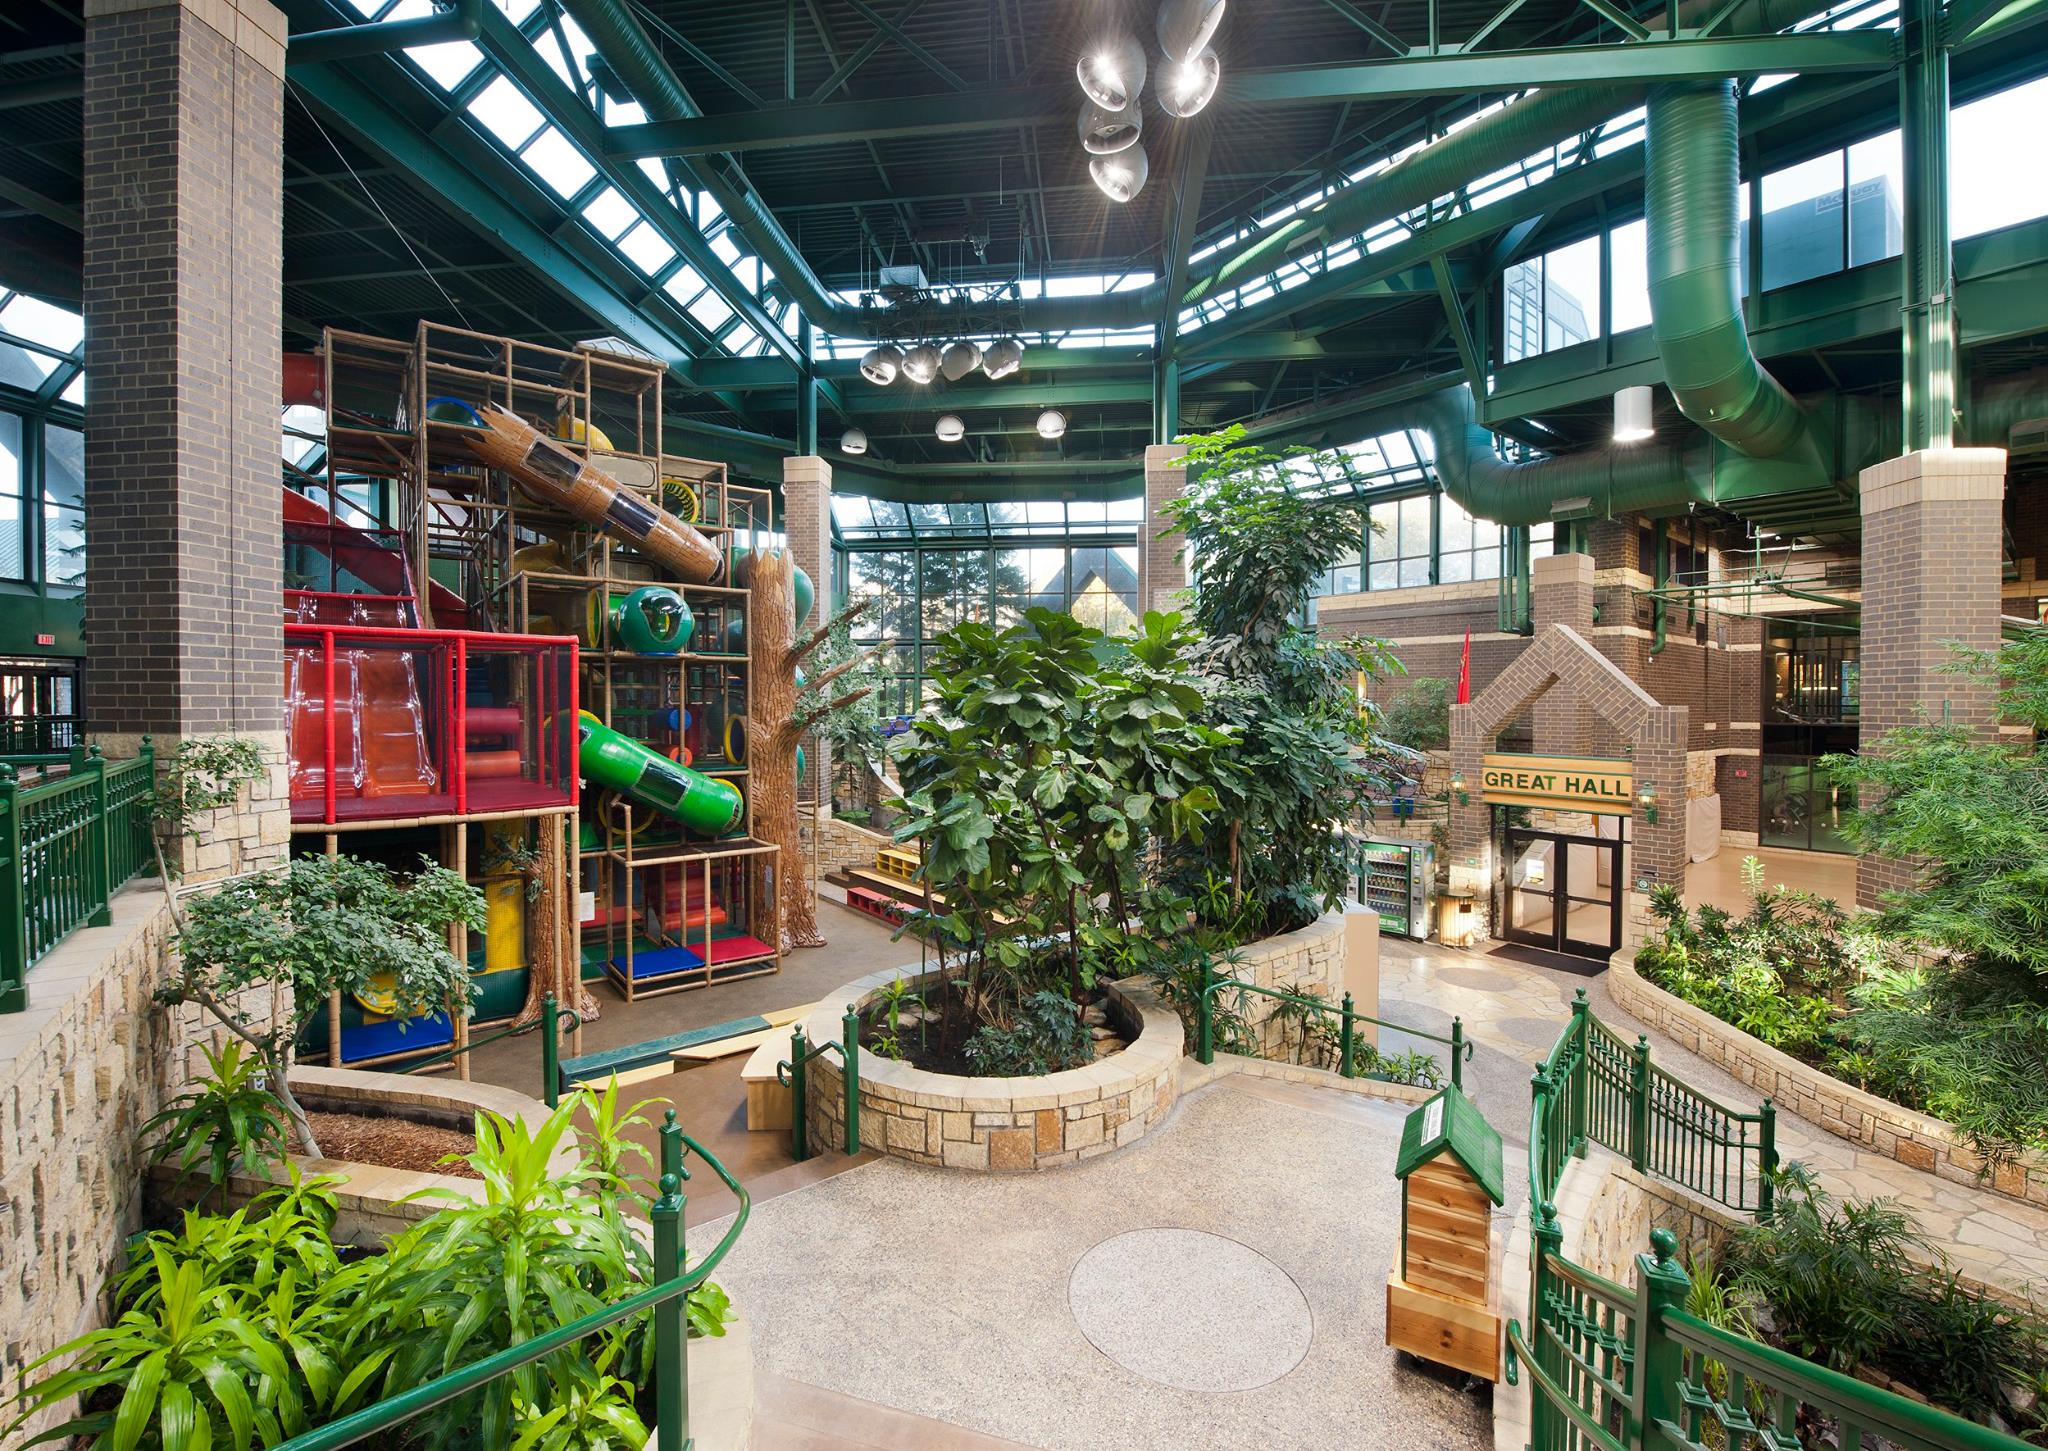 The Most Epic Indoor Playground In Minnesota Will Bring Out The Kid In Everyone